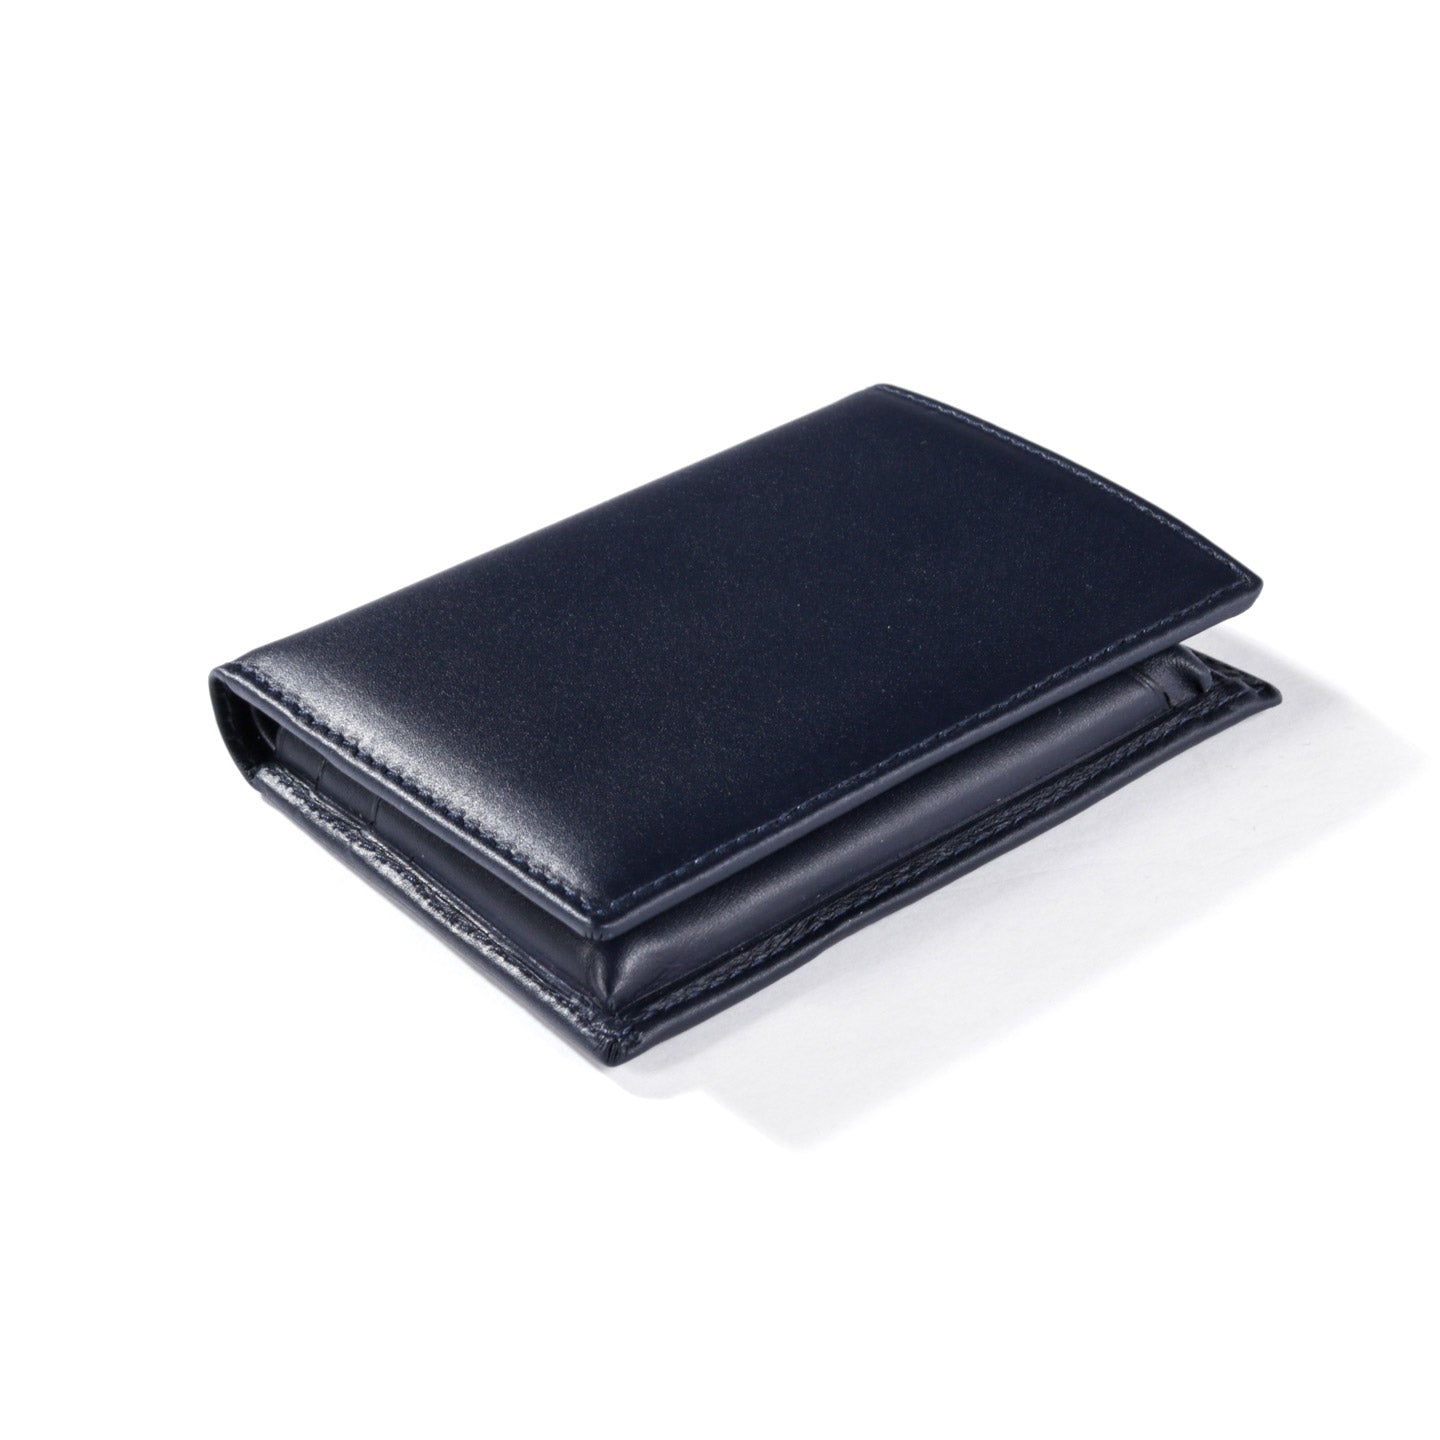 COMME DES GARCONS SA0641 CLASSIC LEATHER WALLET NAVY